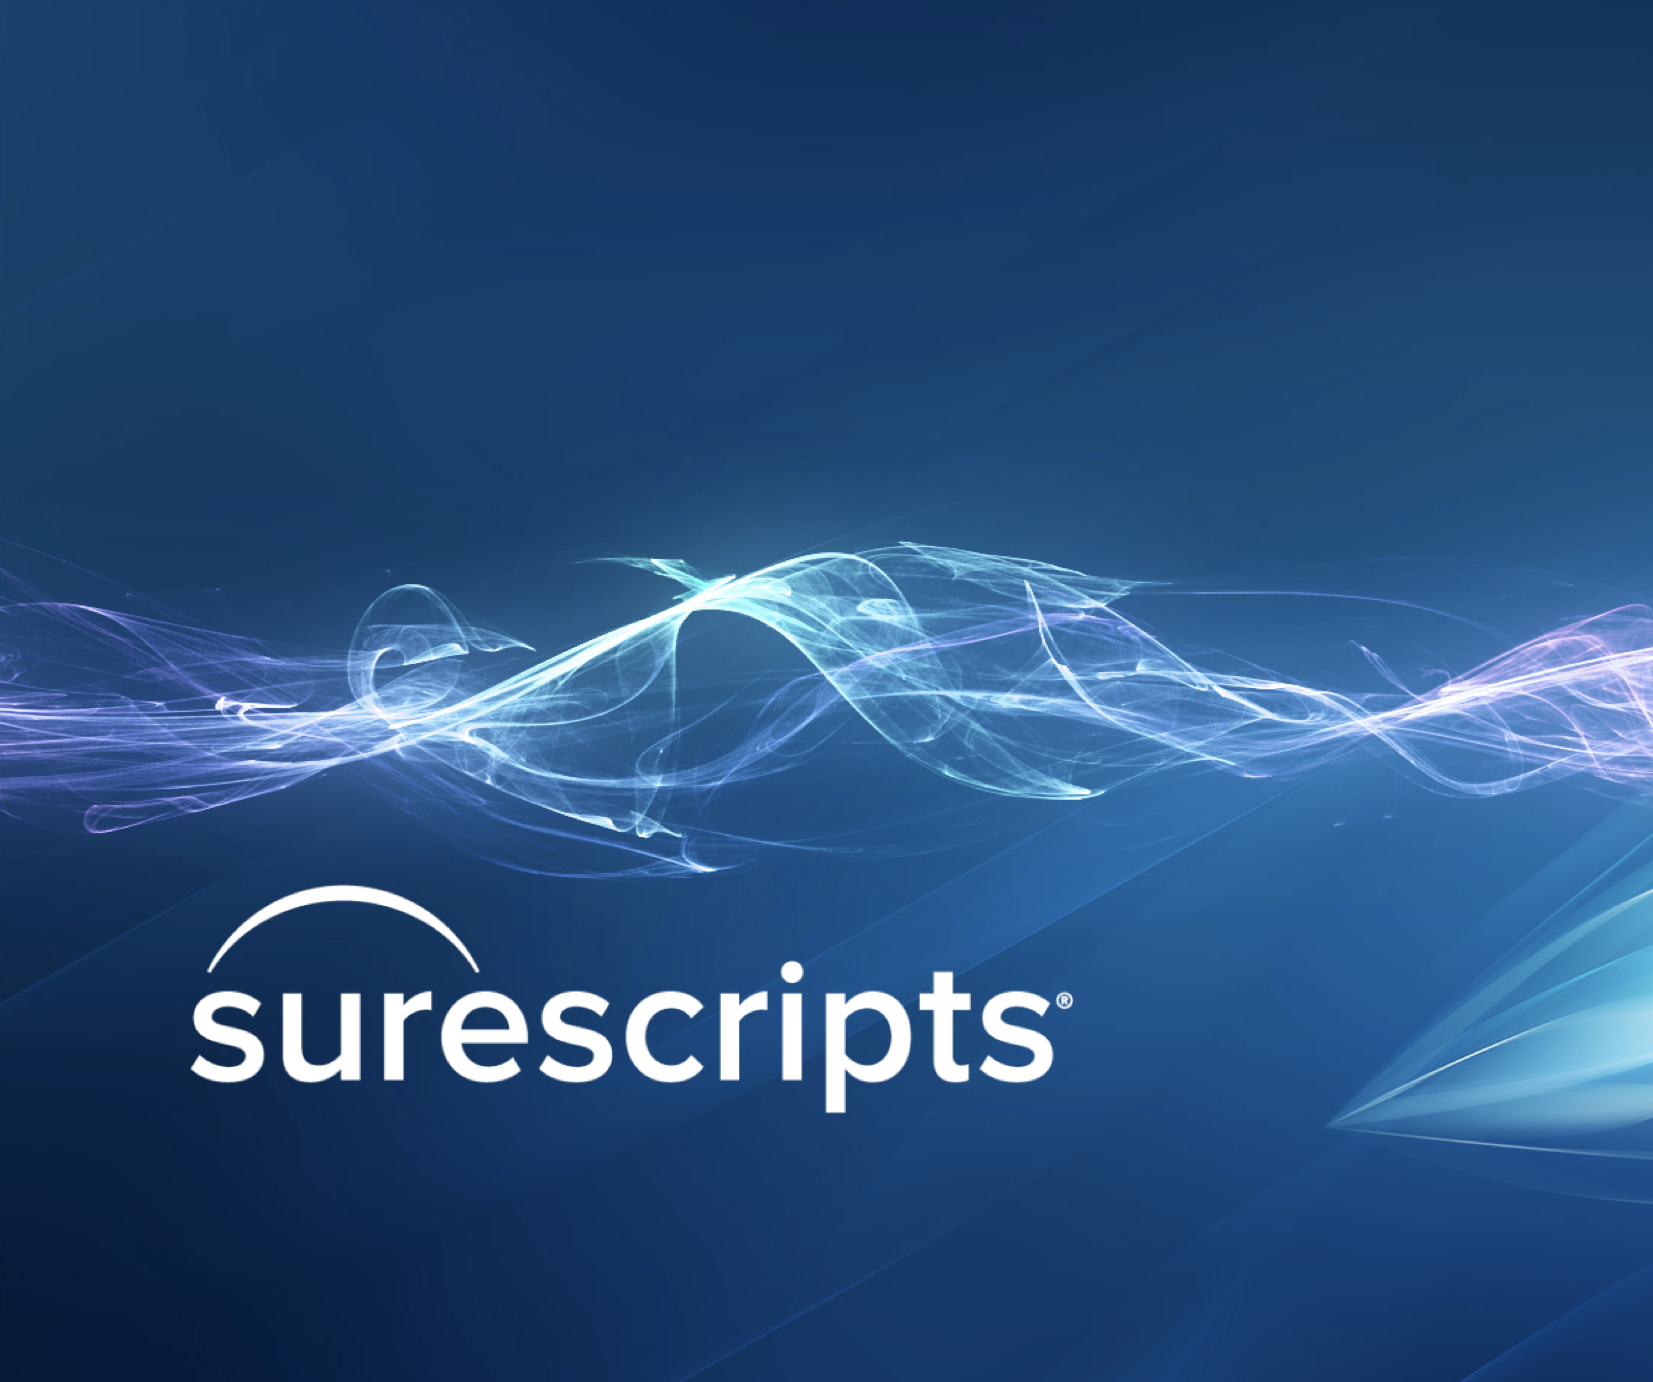 Addressing Medication Affordability & Adherence – Surescripts Reaches More than Half of all U.S. Prescribers